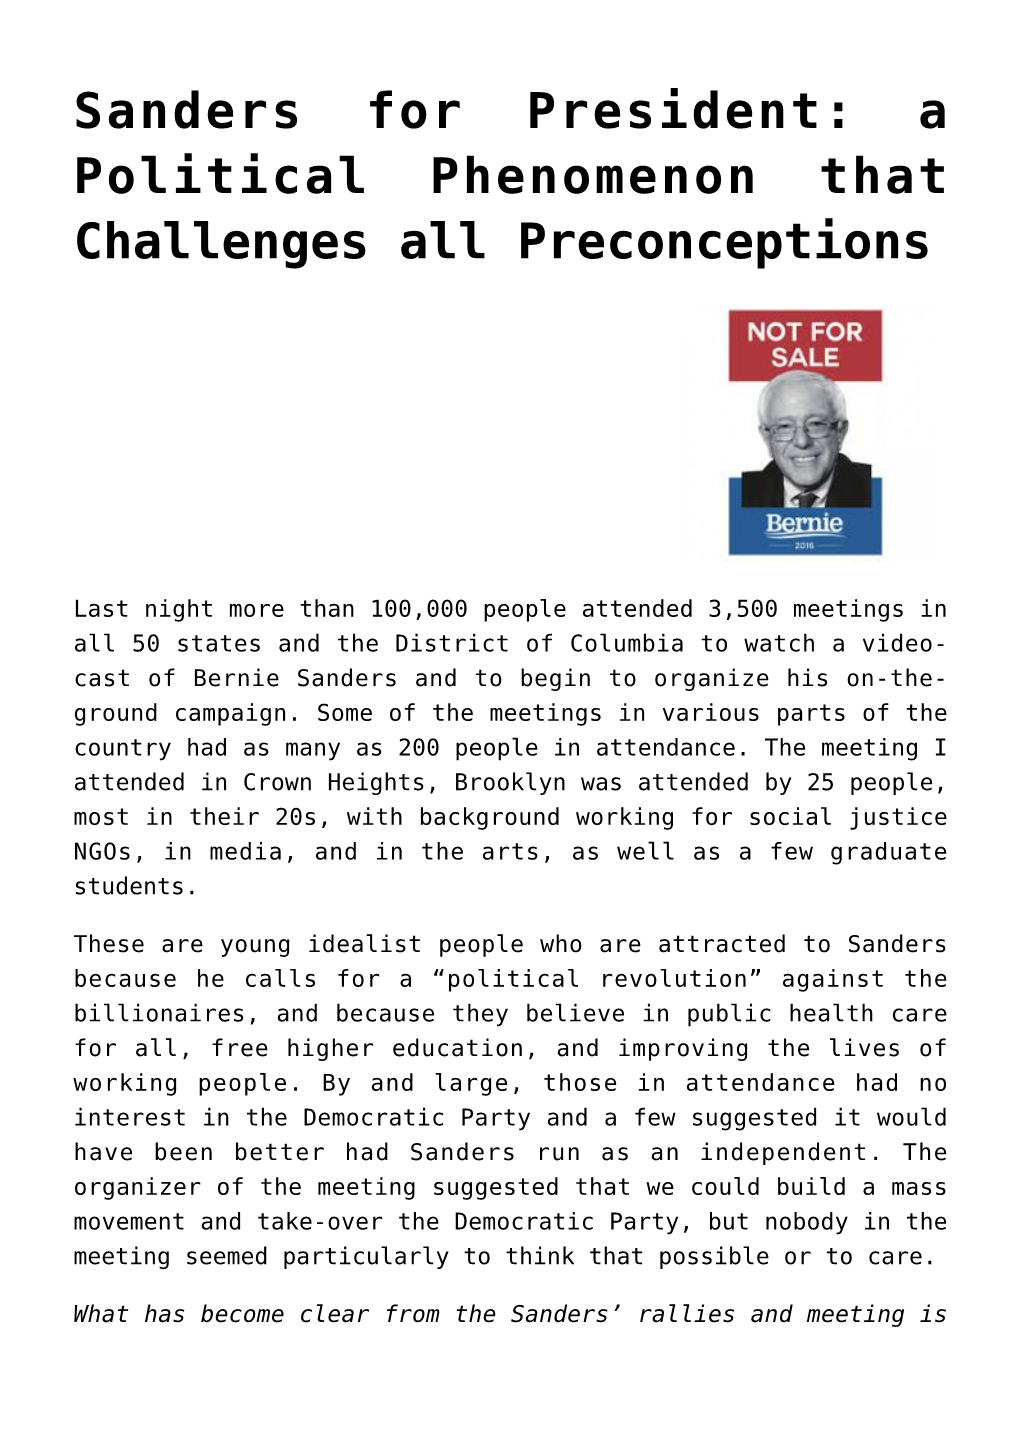 Sanders for President: a Political Phenomenon That Challenges All Preconceptions